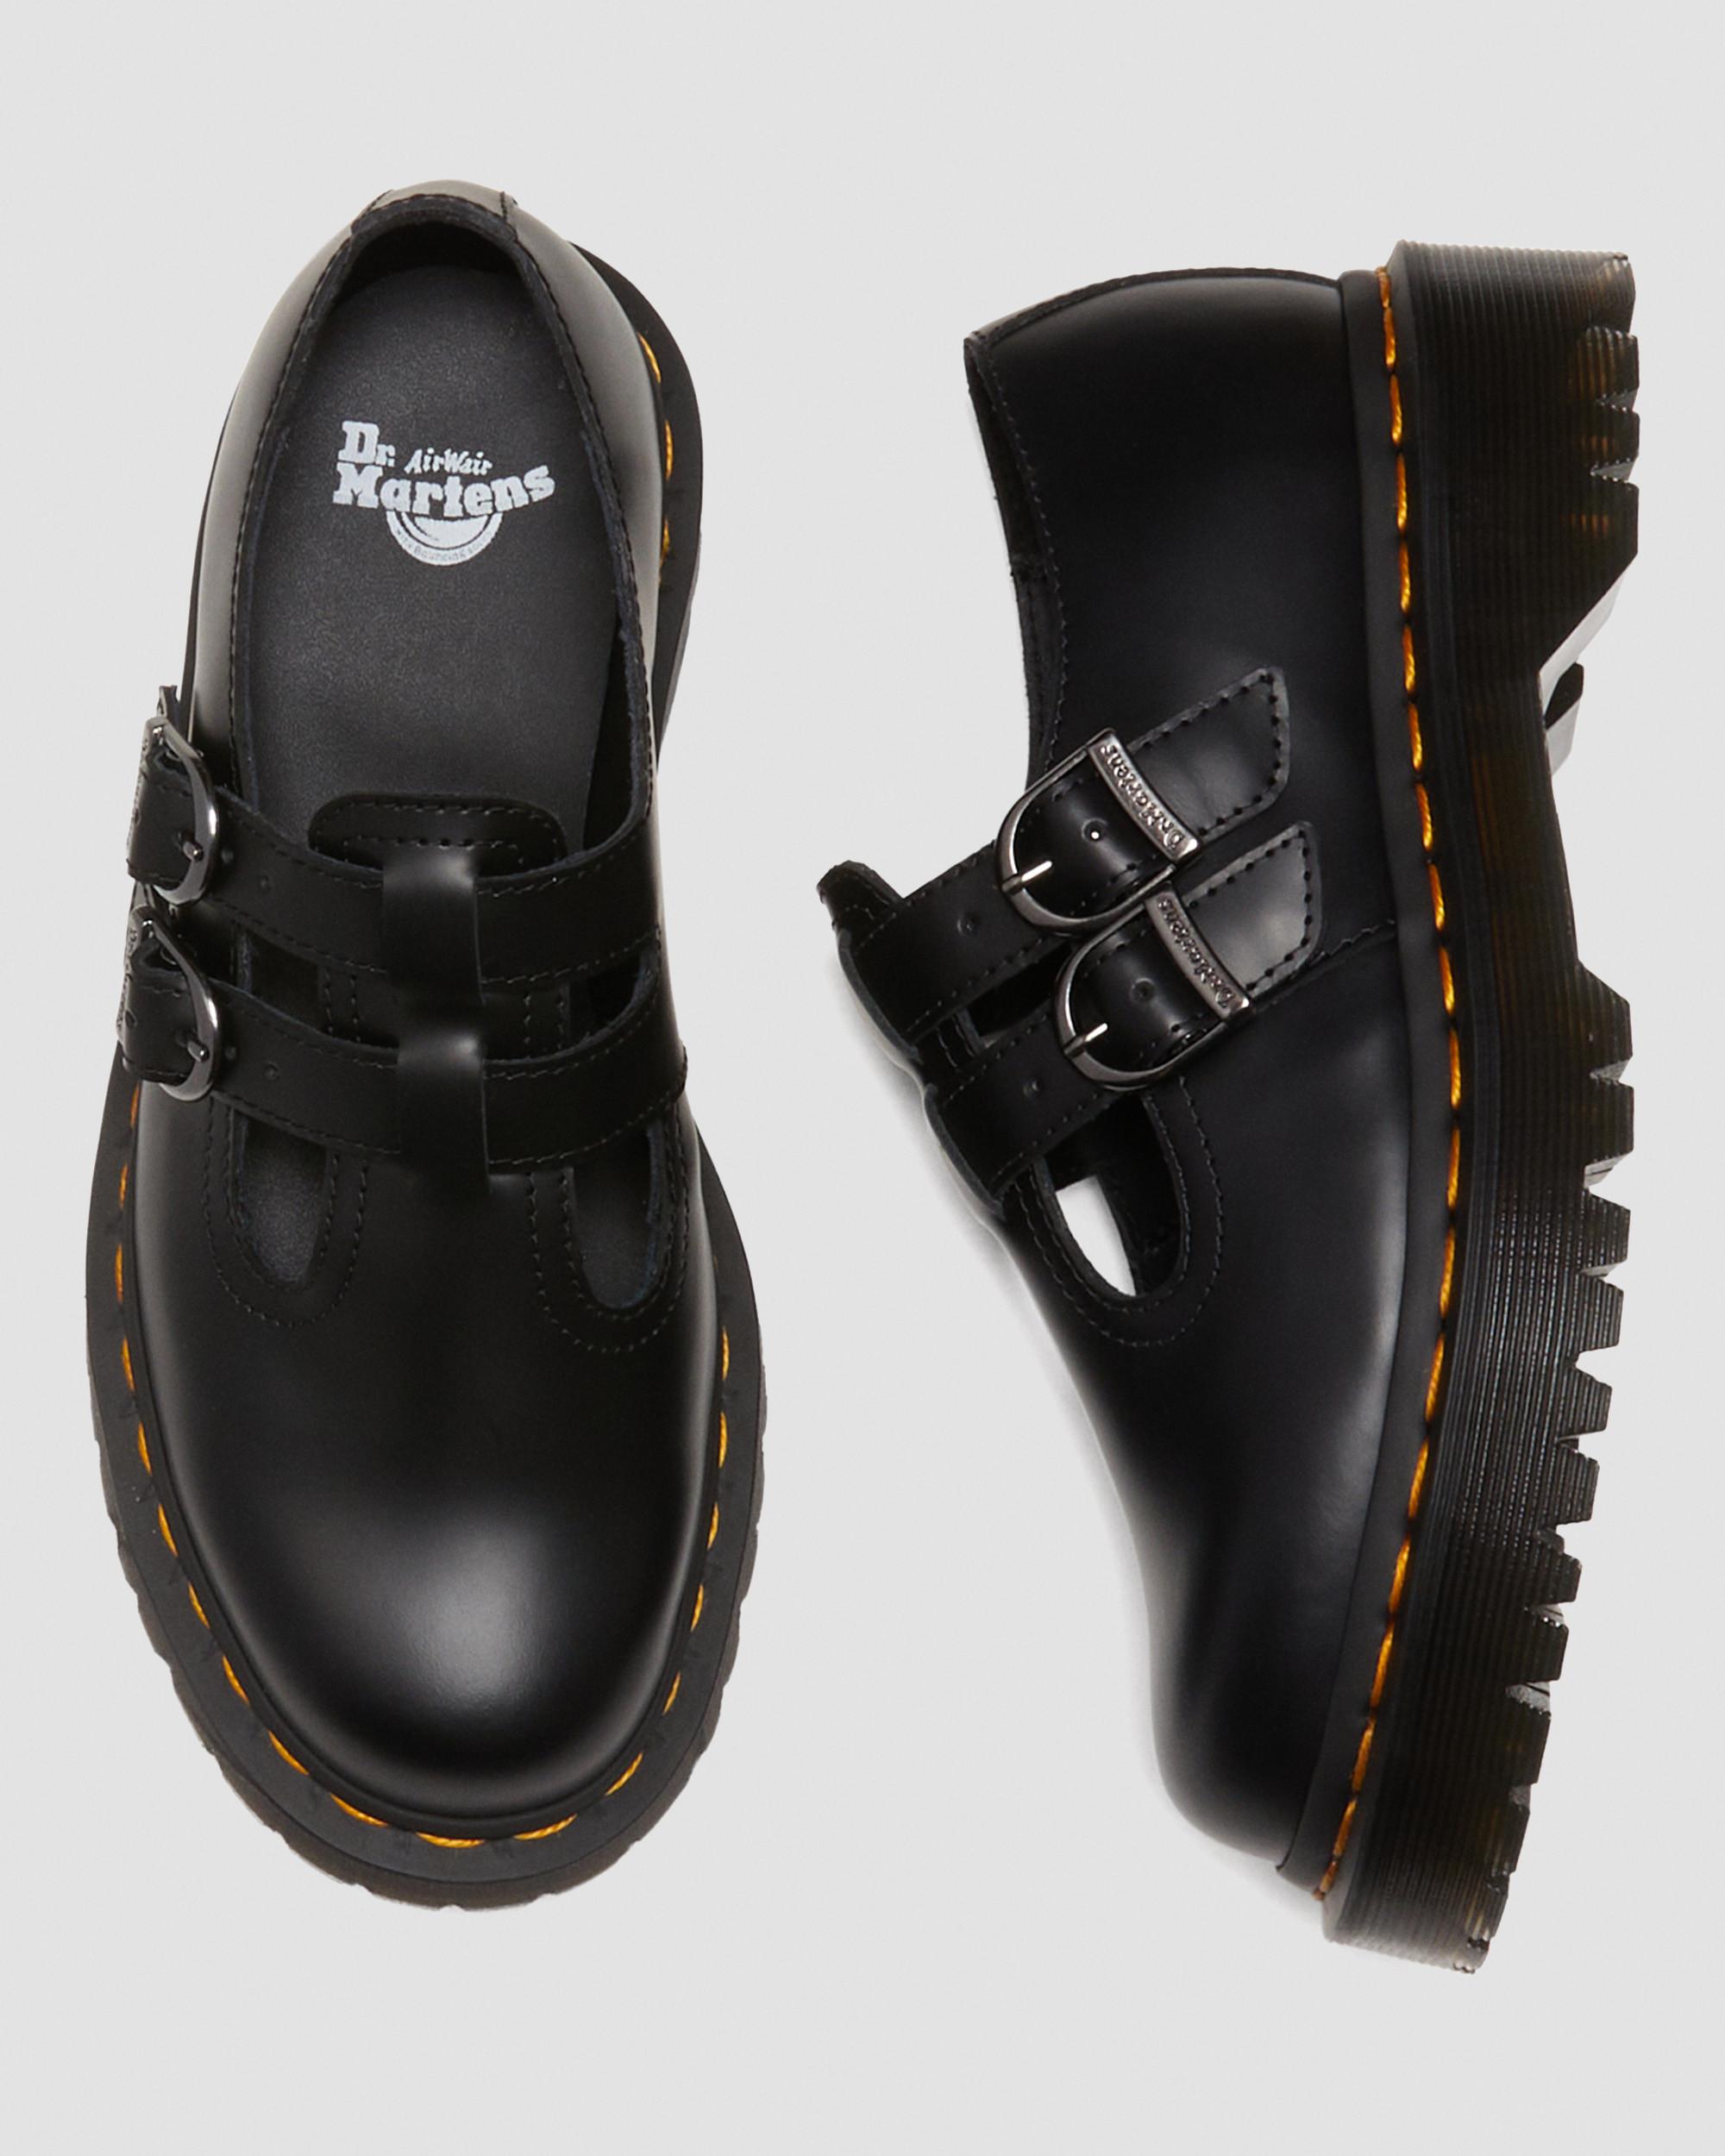 Martens 8065 Smooth Leather Mary Jane Shoe | lupon.gov.ph